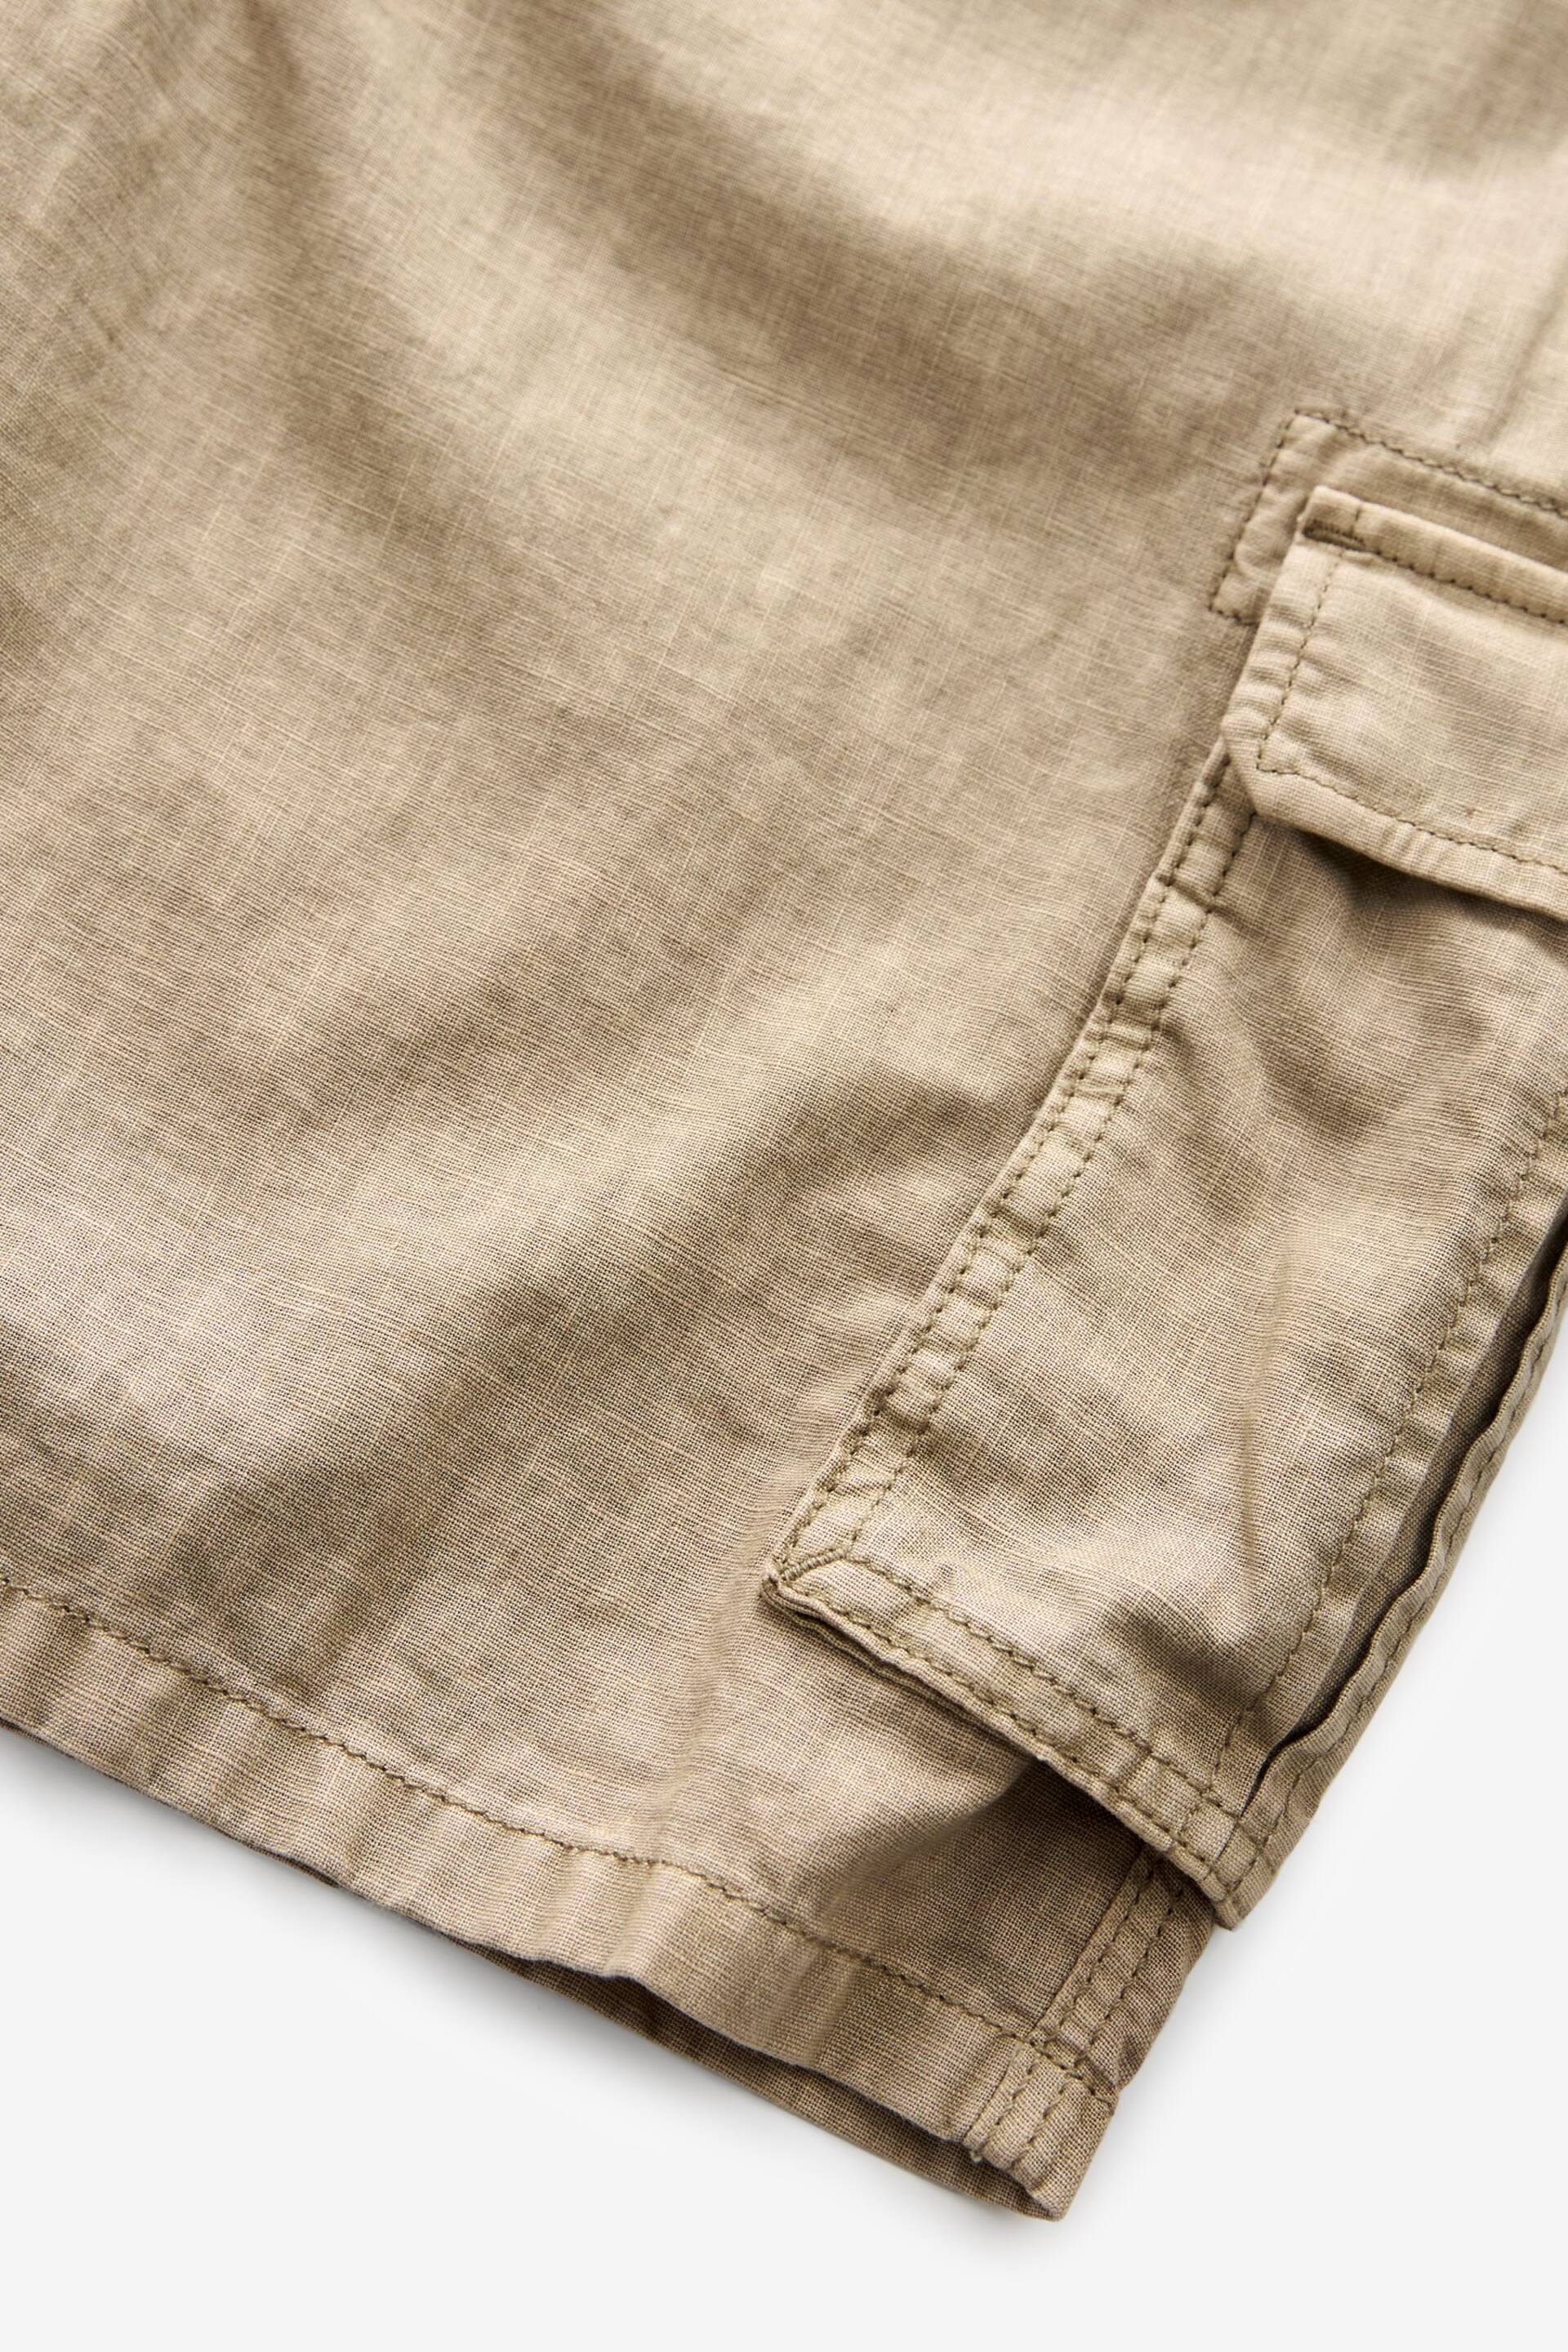 Stone Natural Cotton Linen Cargo Shorts - Image 9 of 10